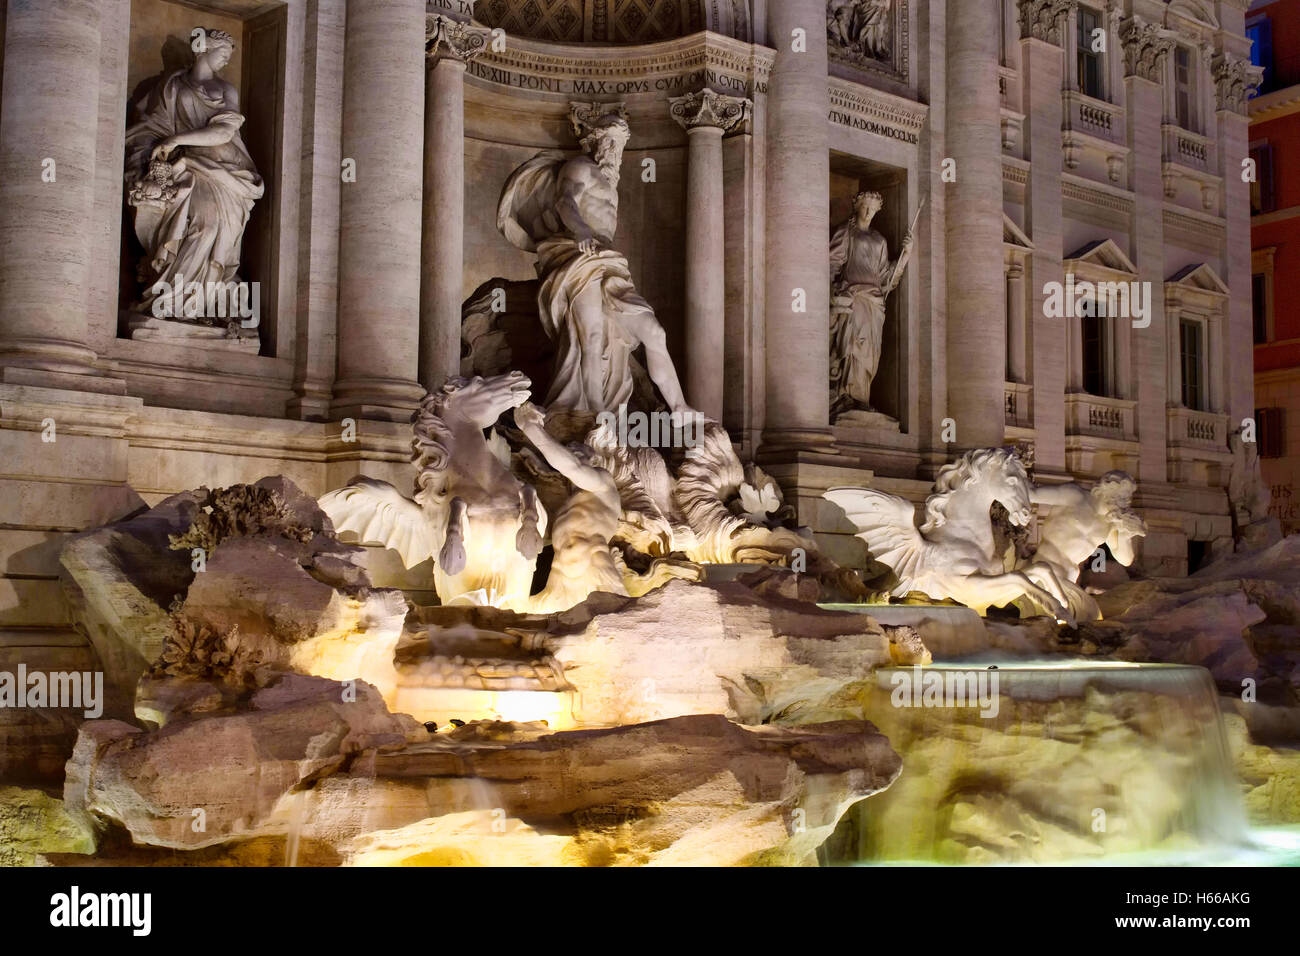 Fontana Di Trevi (Trevi Fountain) at night in Rome. Aqueduct-fed rococo style, designed by Nicola Salvi & completed in 1762, wit Stock Photo